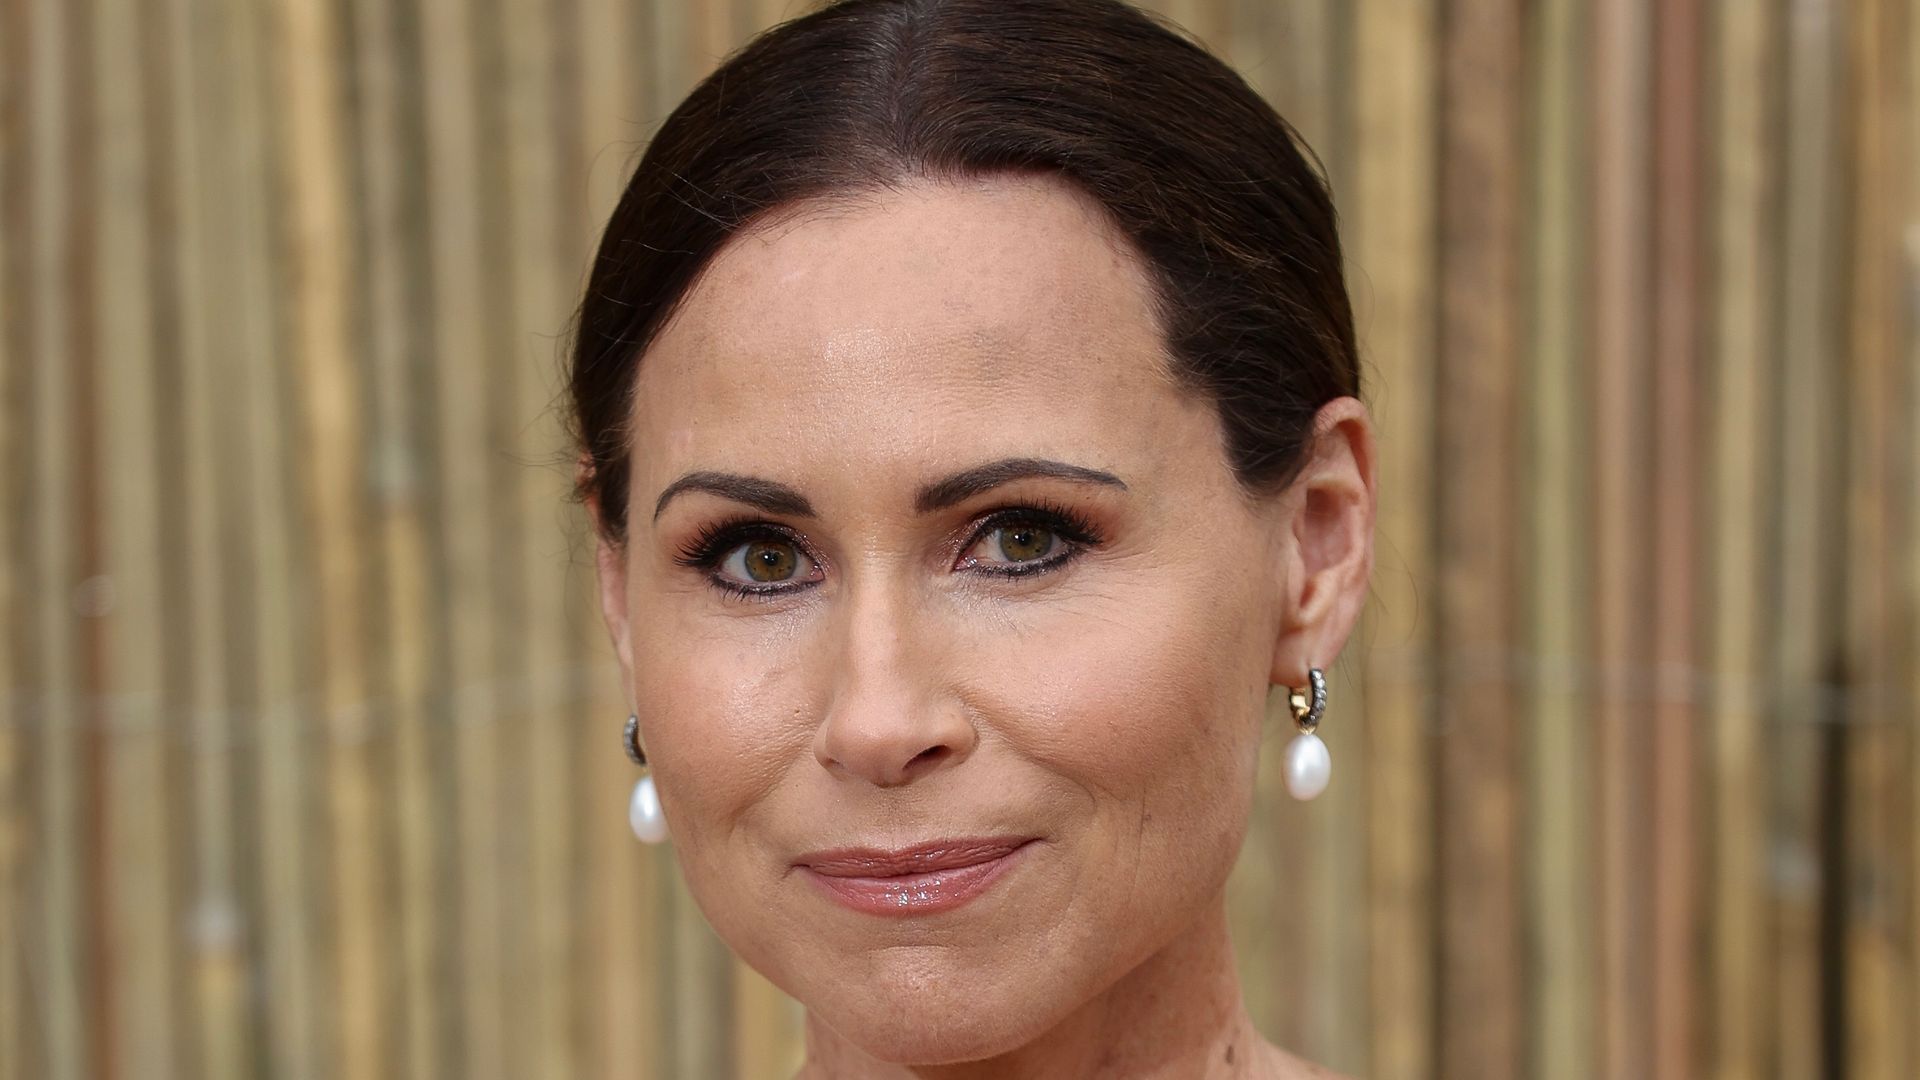 Minnie Driver's shocking confession about relationship with Matt Damon revealed